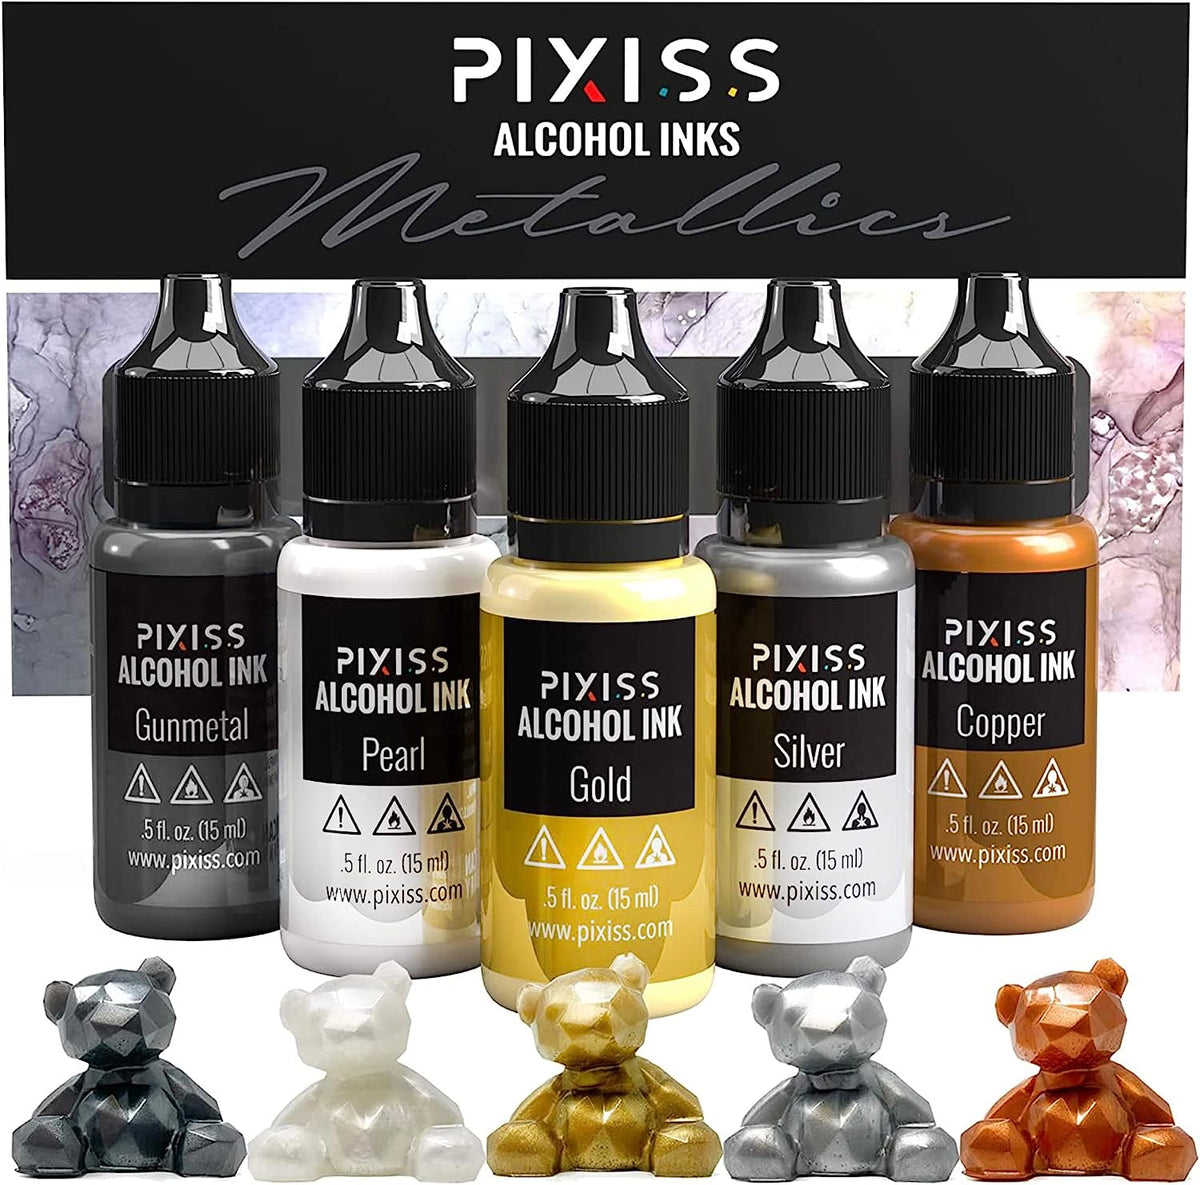 Pixiss Metallic Alcohol Ink Set - Silver and Gold Metallic Alcohol Ink  Mixatives, 5oz Metallic Alcohol Pigment Resin Dye, Alcohol Inks for Epoxy  Resin, Metallic Mixative for Yupo and Tumbler Cups